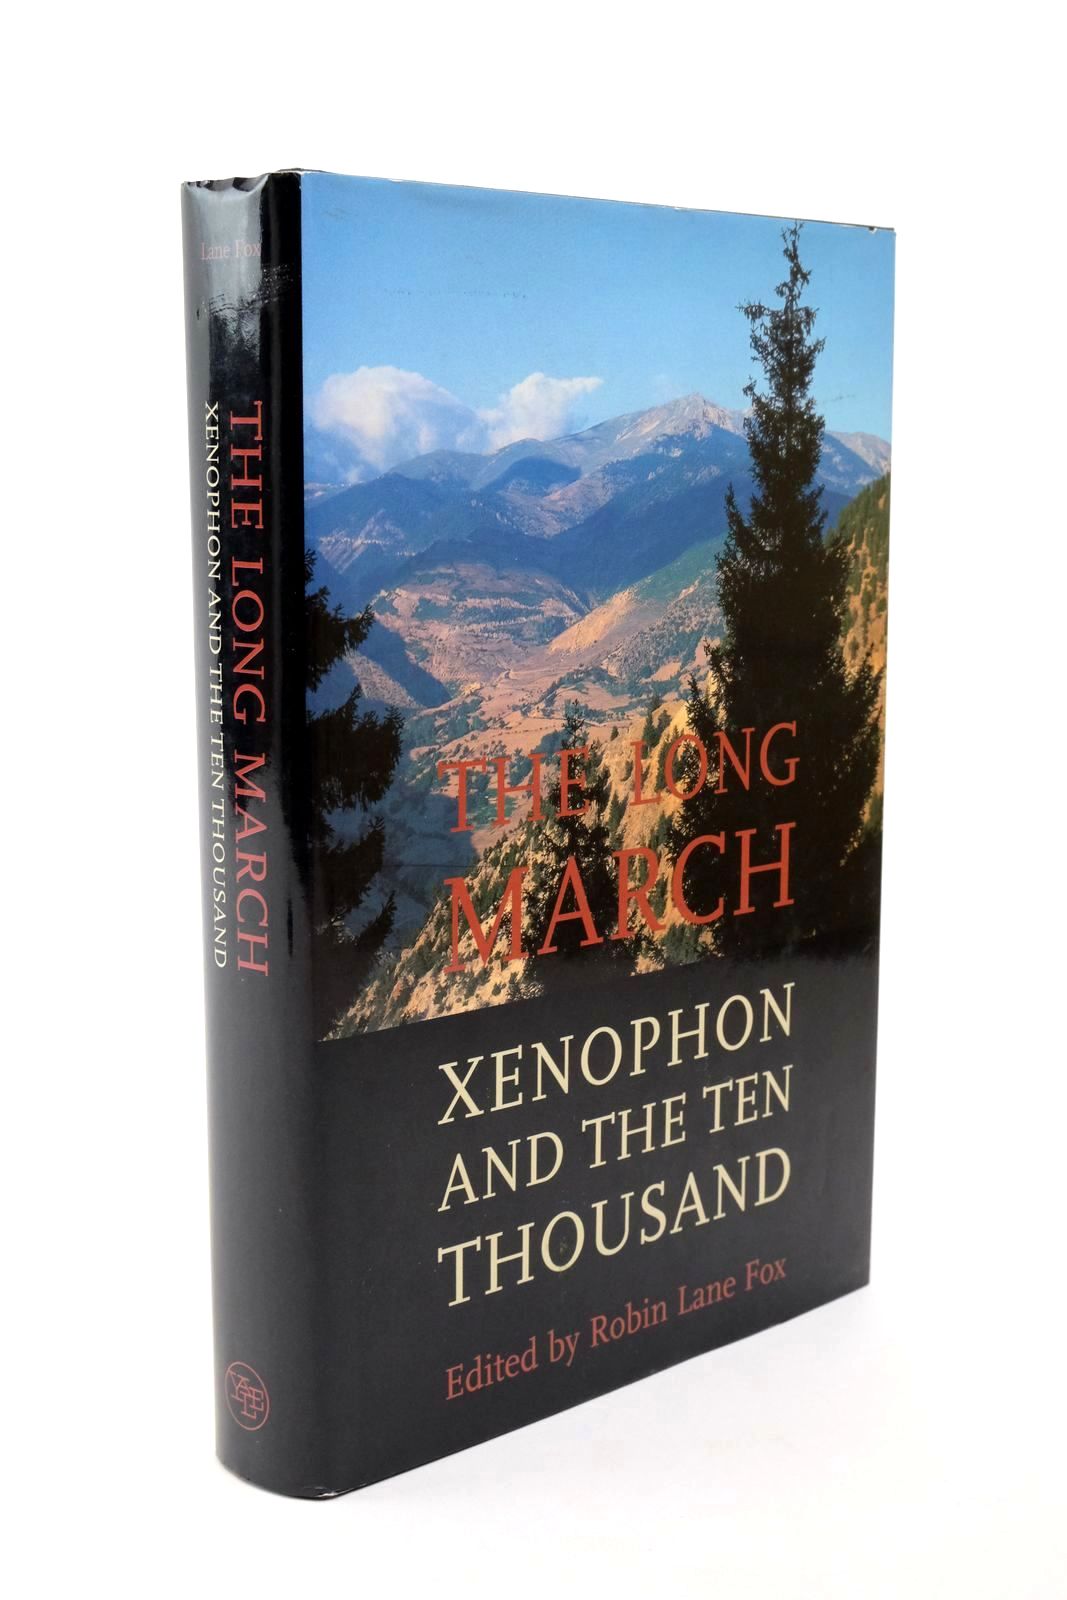 Photo of THE LONG MARCH - XENOPHON AND THE TEN THOUSAND- Stock Number: 1322608